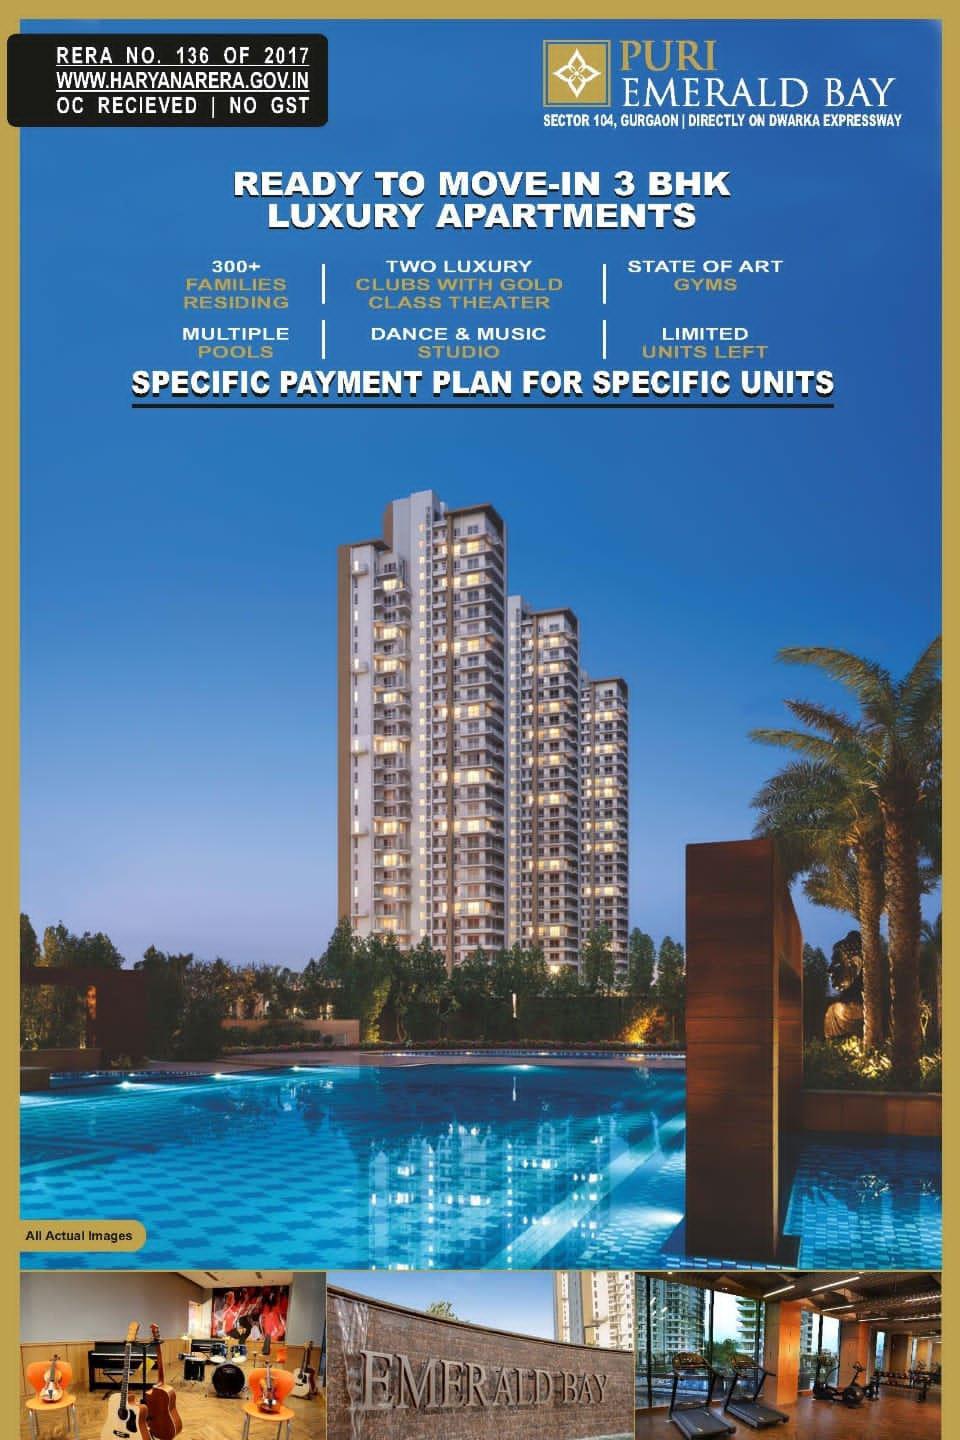 PURI Emerald Bay: Experience Unmatched Elegance in Sector 104, Gurgaon Update